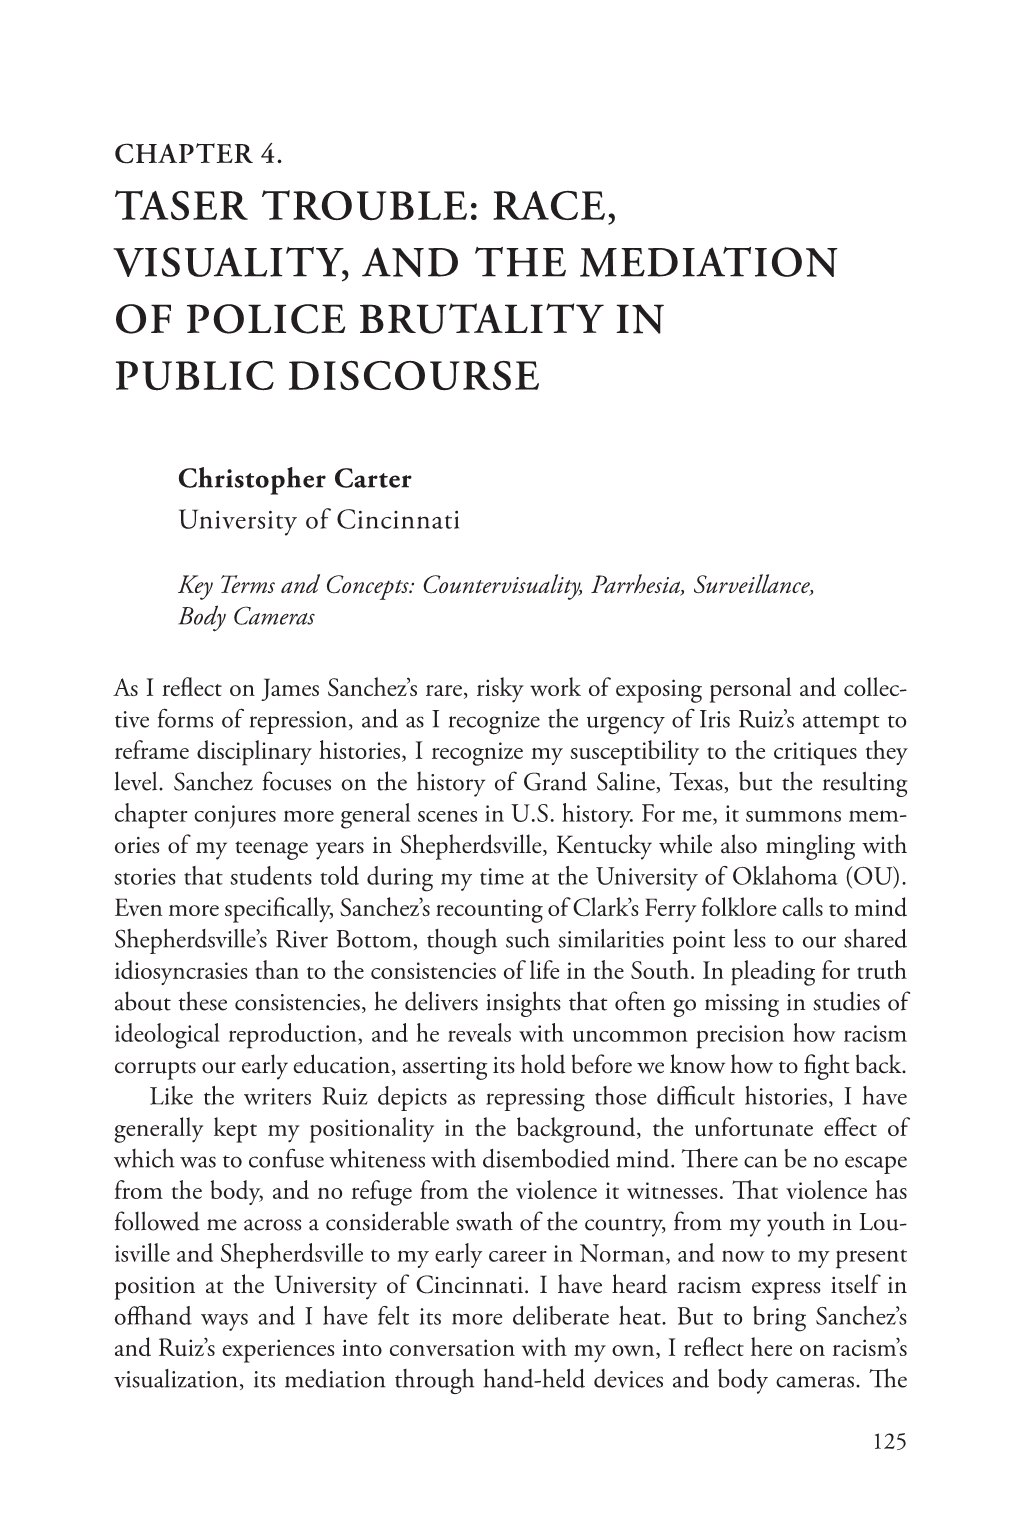 Chapter 4. Taser Trouble: Race, Visuality, and the Mediation of Police Brutality in Public Discourse